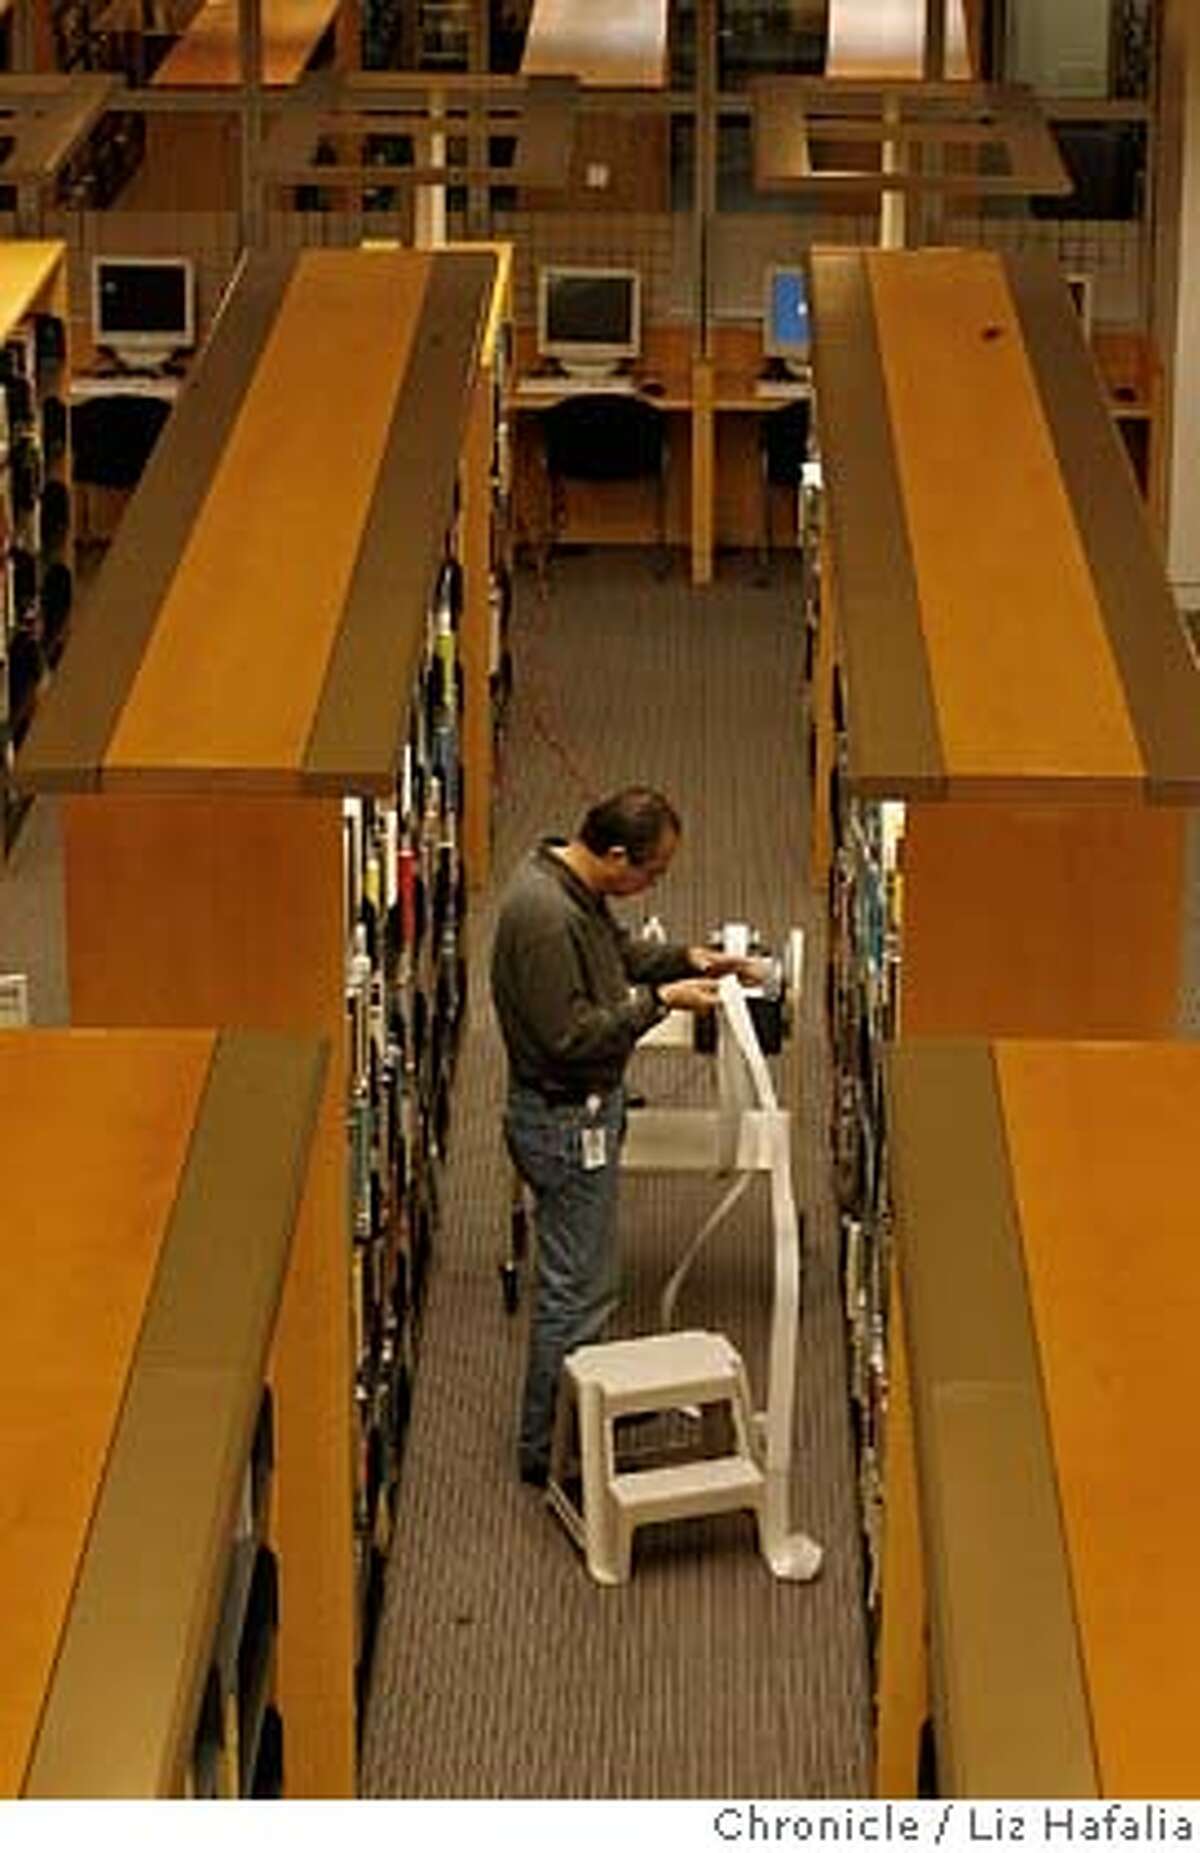 Librarian is barcoding books in the new fiction section of the first floor which will have it's opening on Wed. Jan 16. �2007, San Francisco Chronicle/ Liz Hafalia MANDATORY CREDIT FOR PHOTOG AND SAN FRANCISCO CHRONICLE. NO SALES- MAGS OUT.